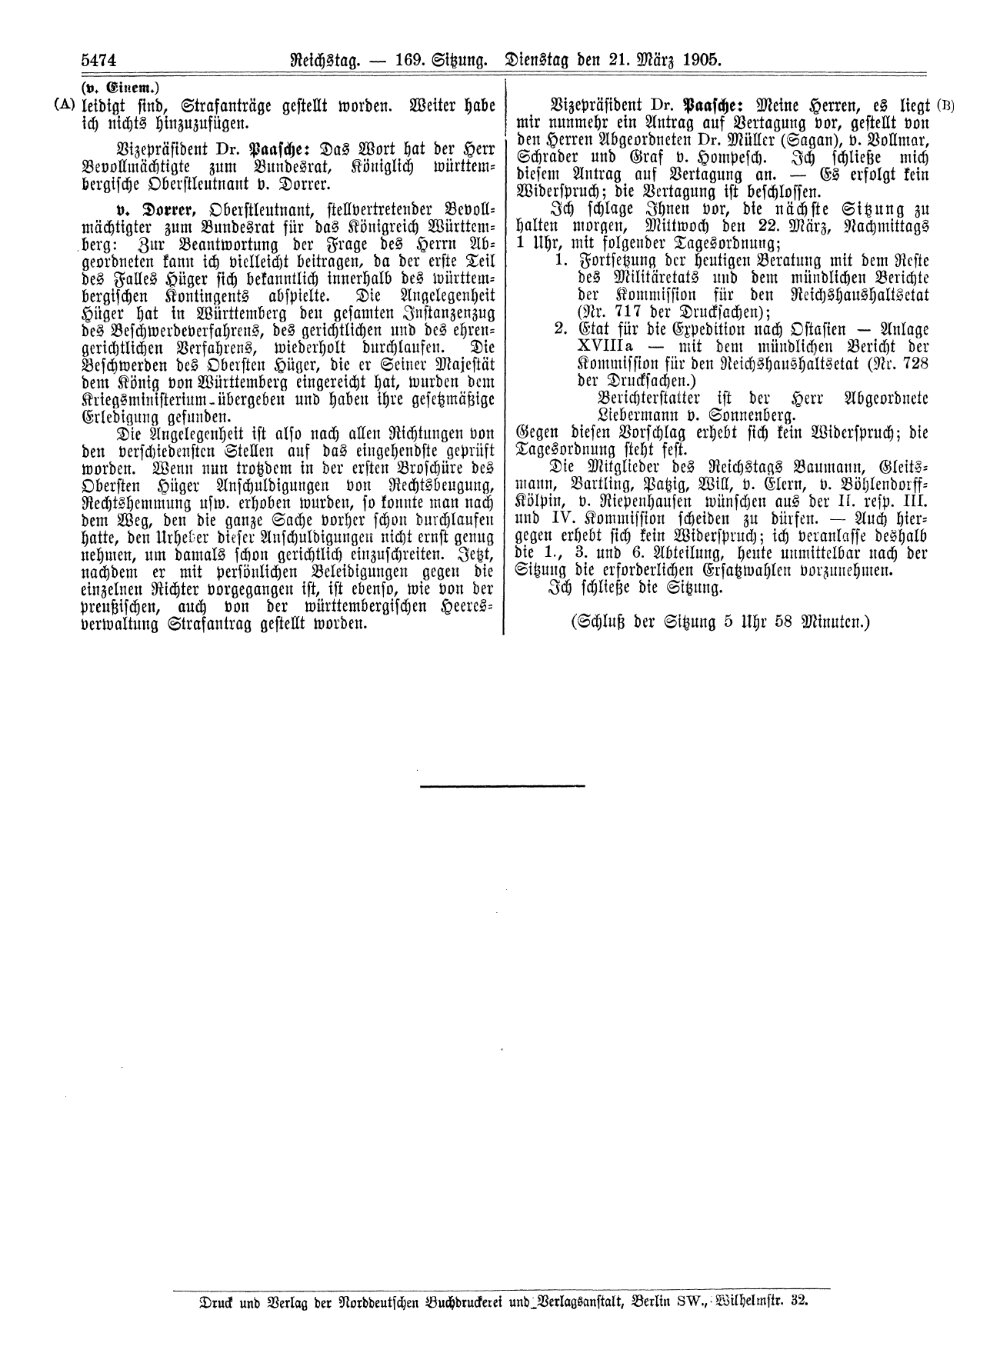 Scan of page 5474